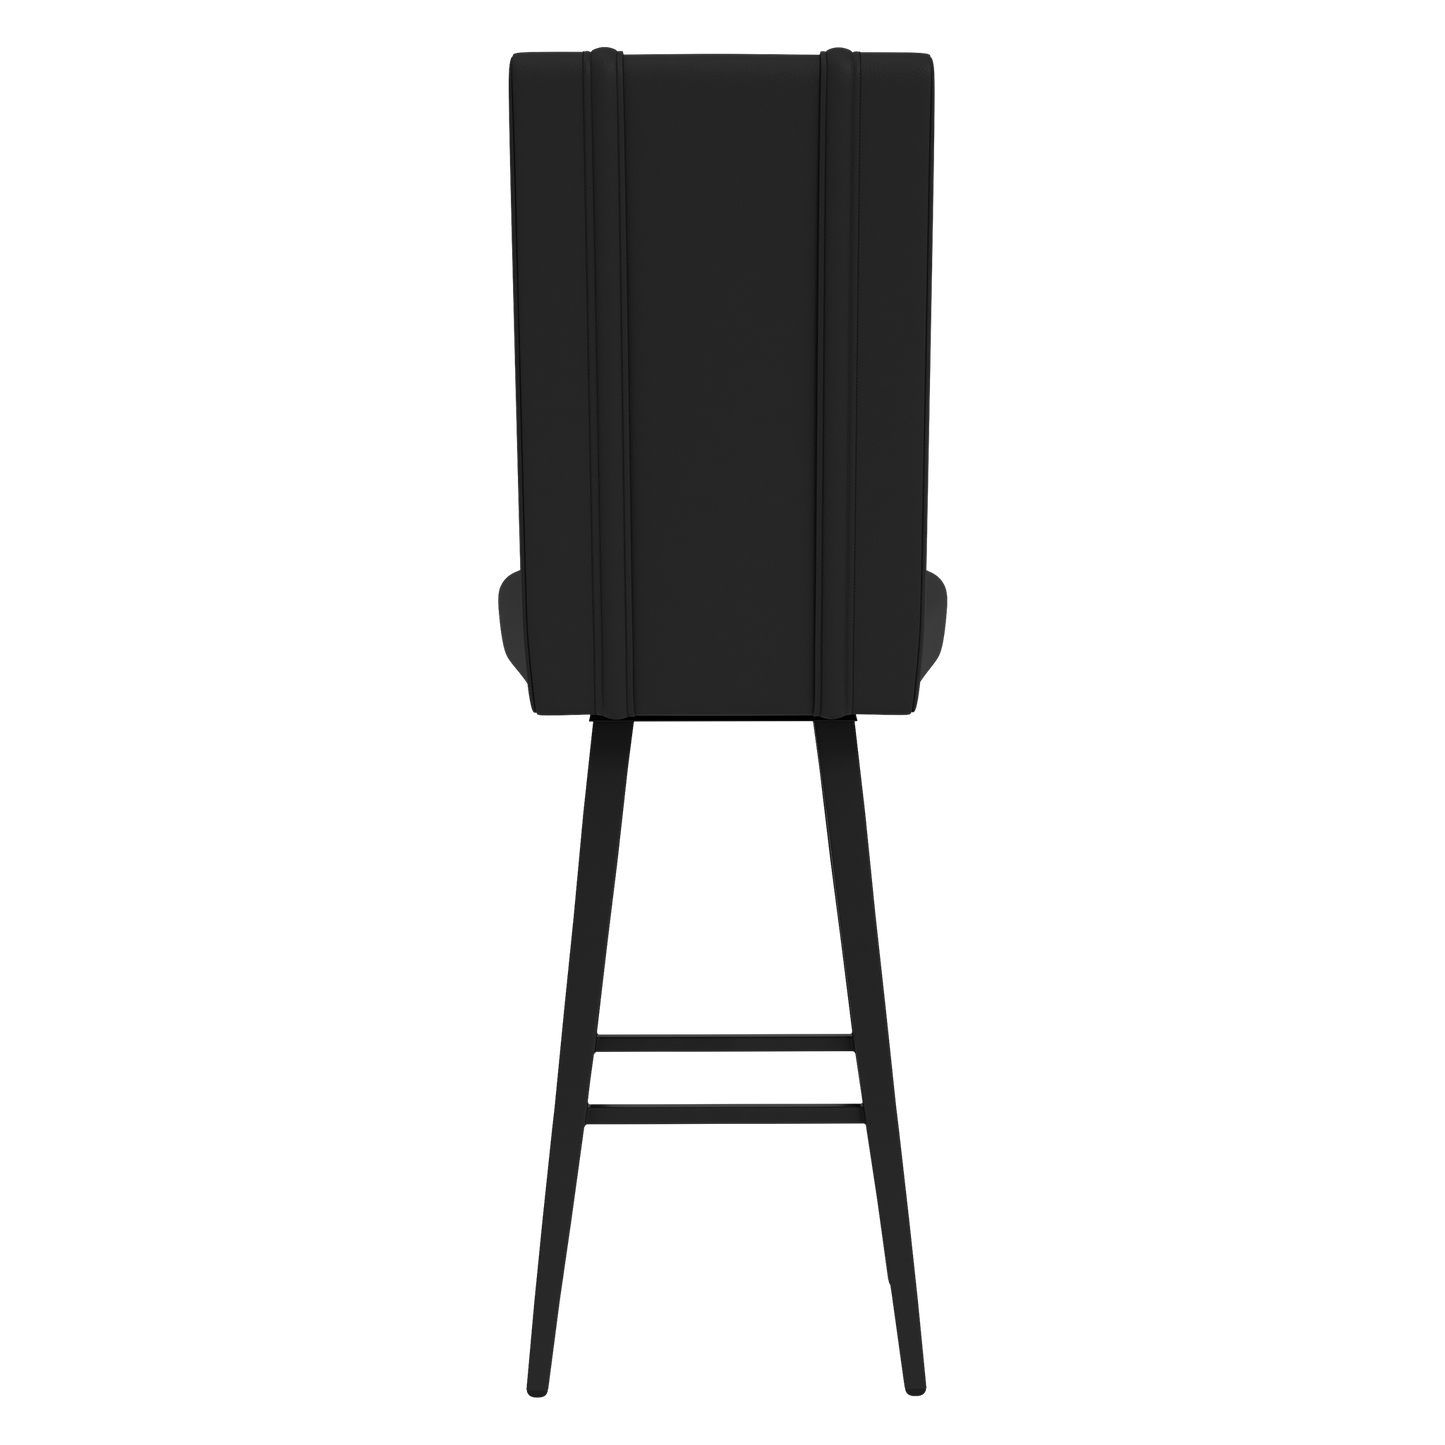 Swivel Bar Stool 2000 with Los Angeles Angels Secondary